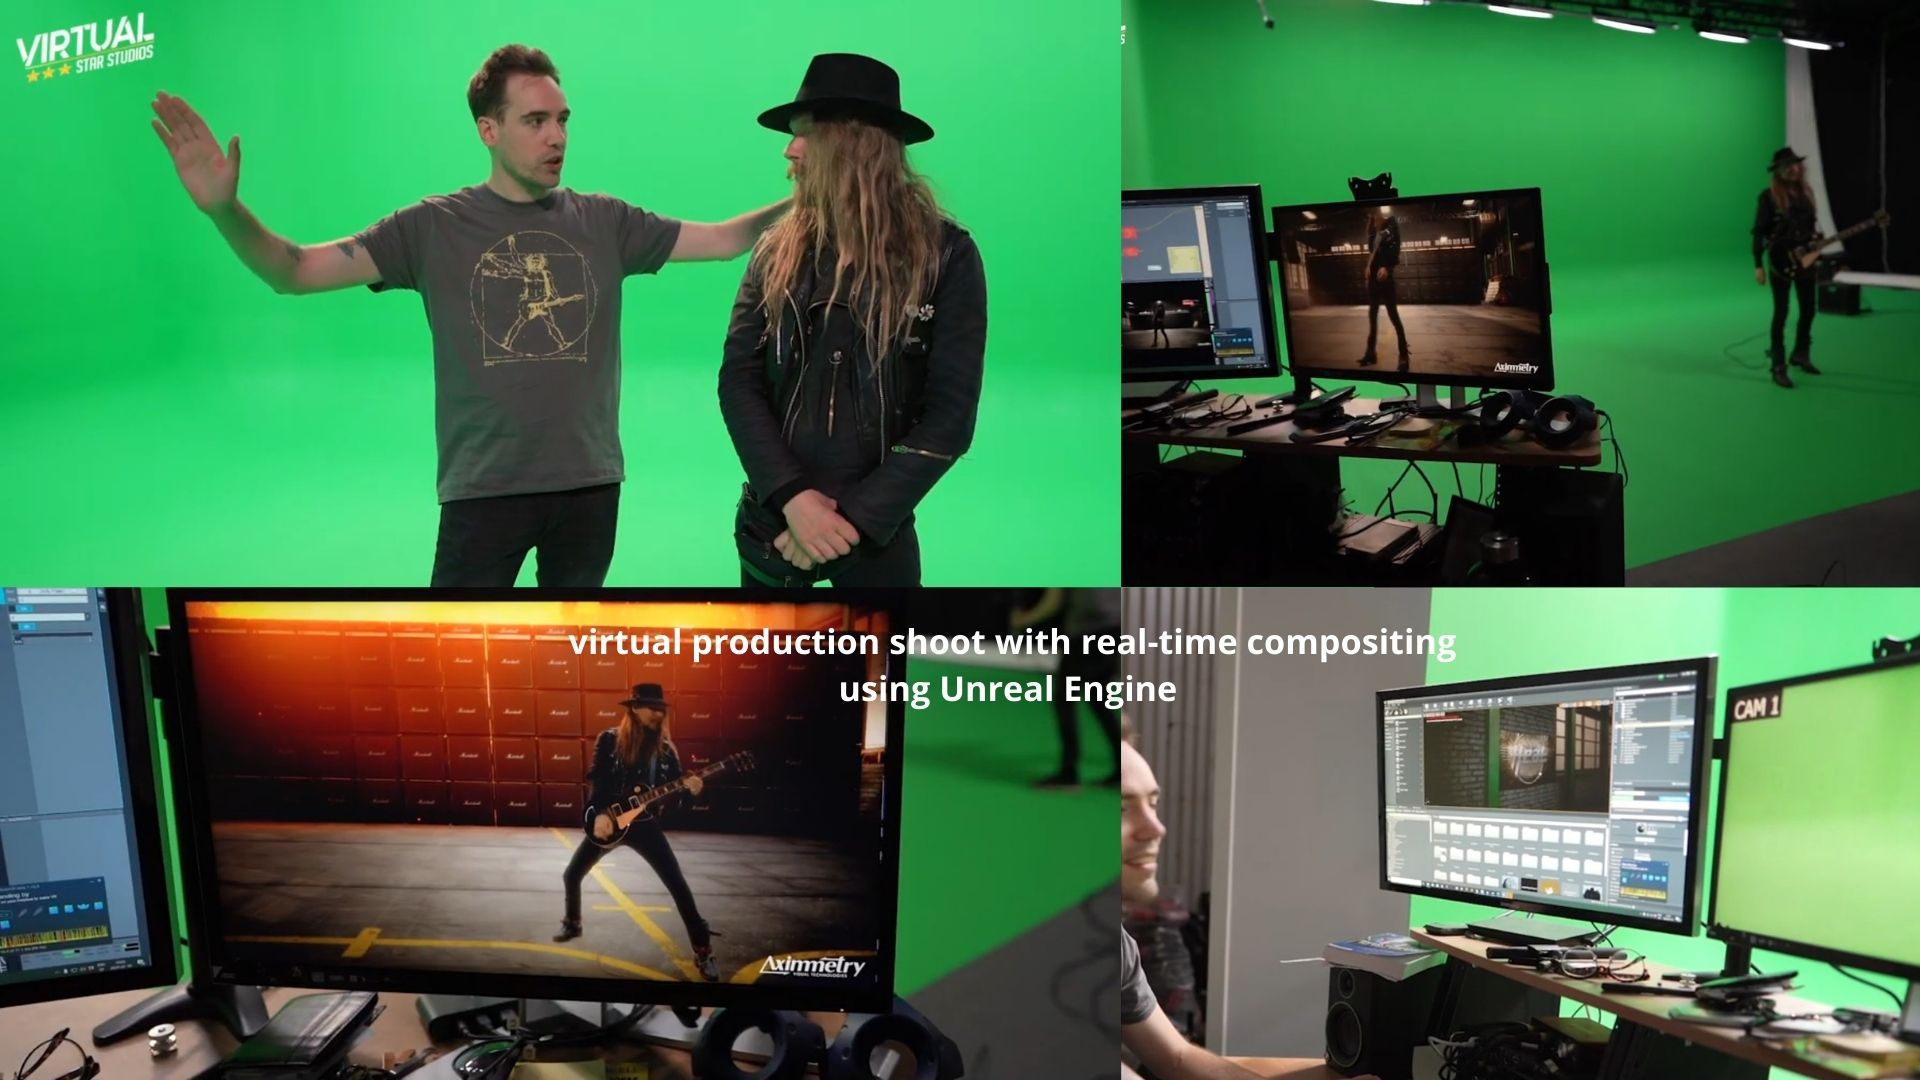 virtual production shoot with real-time compositing using Unreal Engine